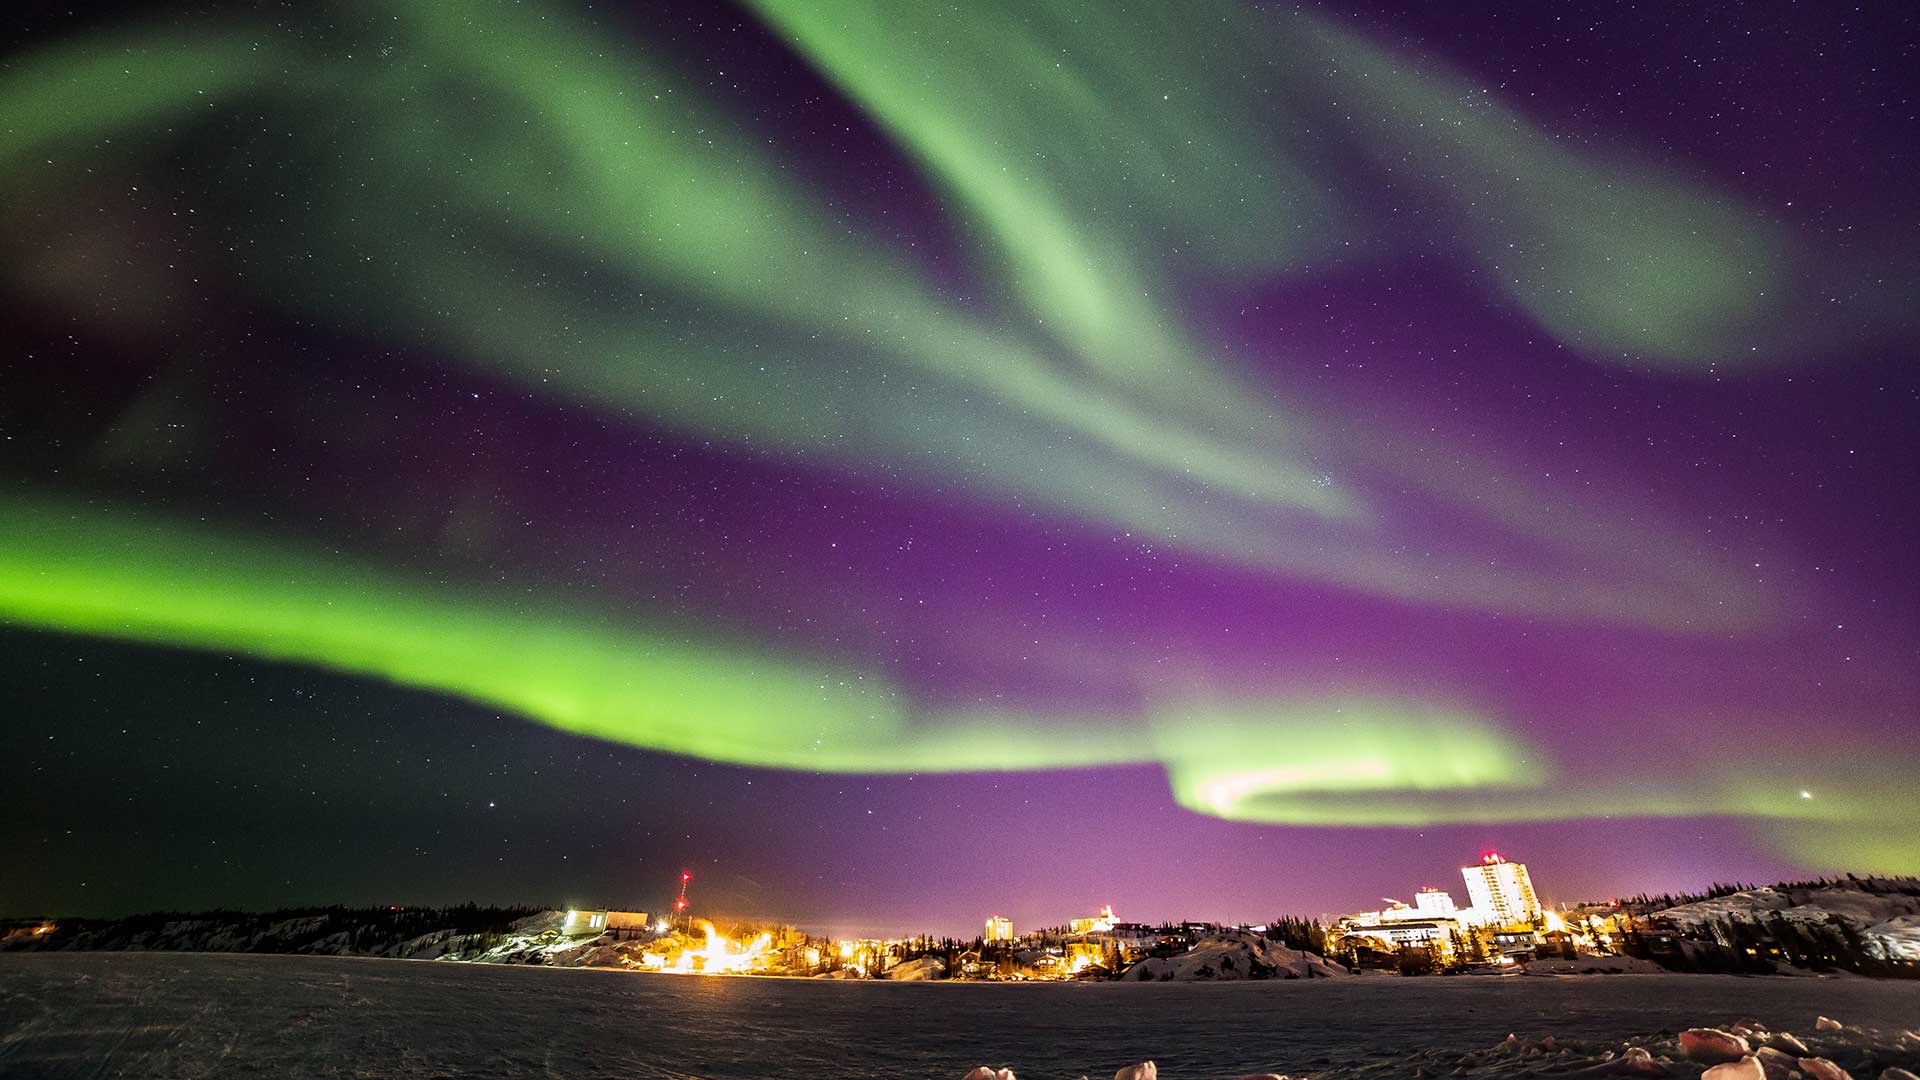 Panorama to illustrate dating in yellowknife